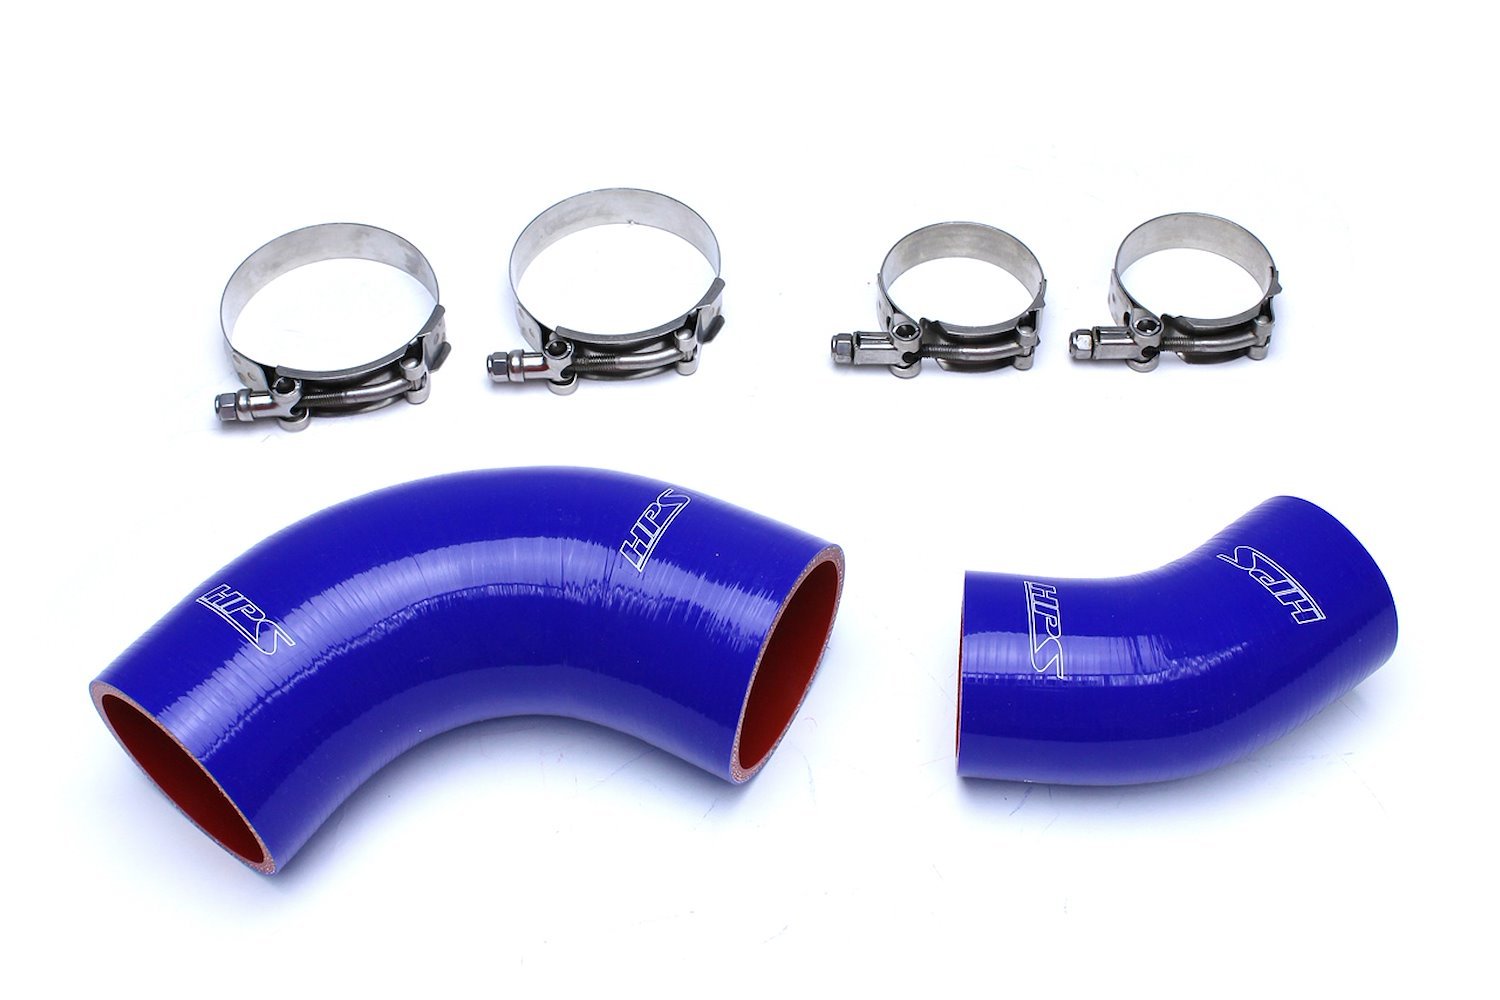 57-1486-BLUE Intercooler Hose Kit, High-Temp 4-Ply Reinforced Silicone, Replace OEM Rubber Intercooler Turbo Boots